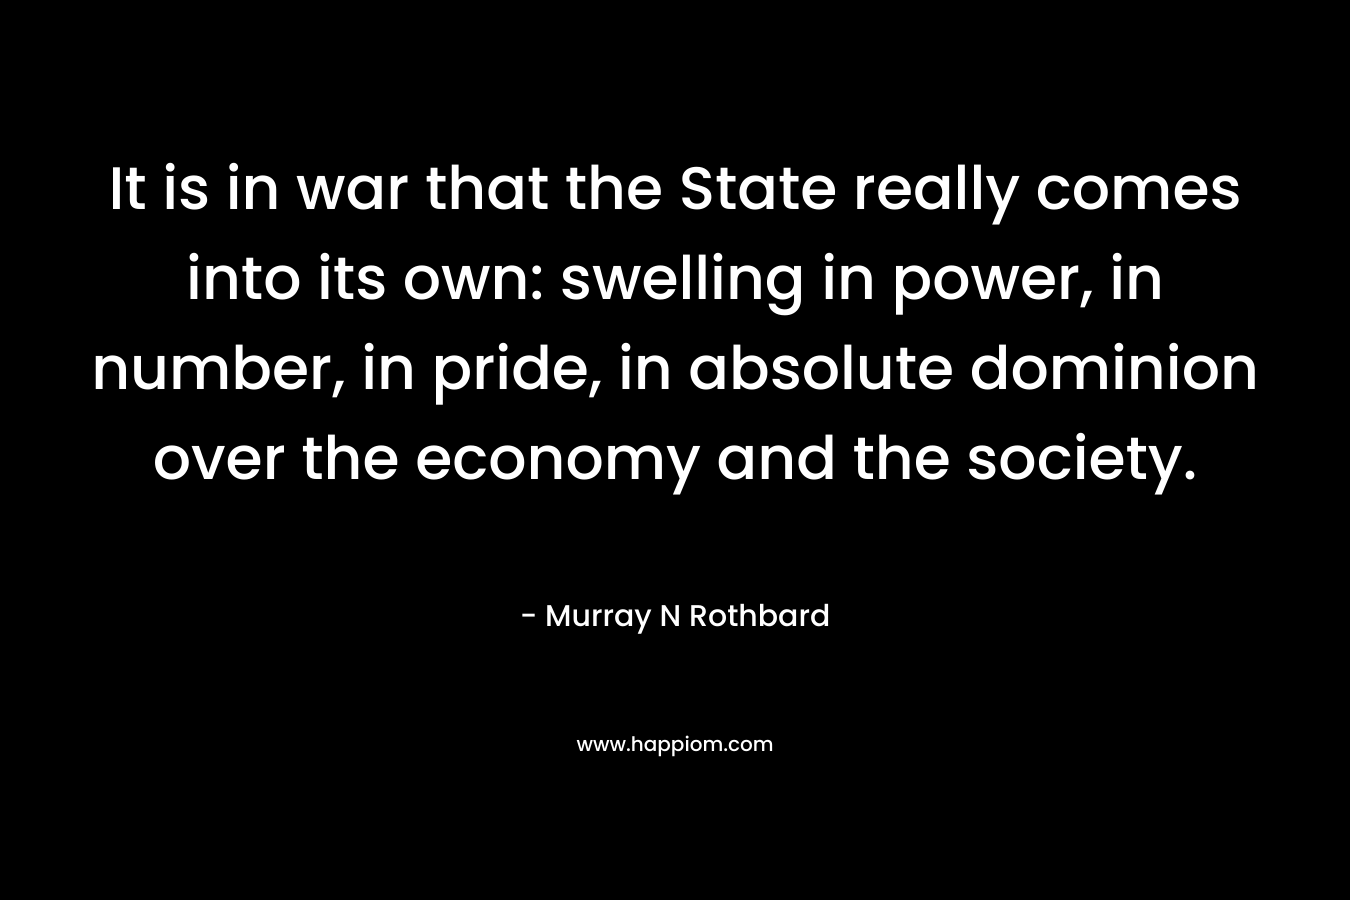 It is in war that the State really comes into its own: swelling in power, in number, in pride, in absolute dominion over the economy and the society. – Murray N Rothbard